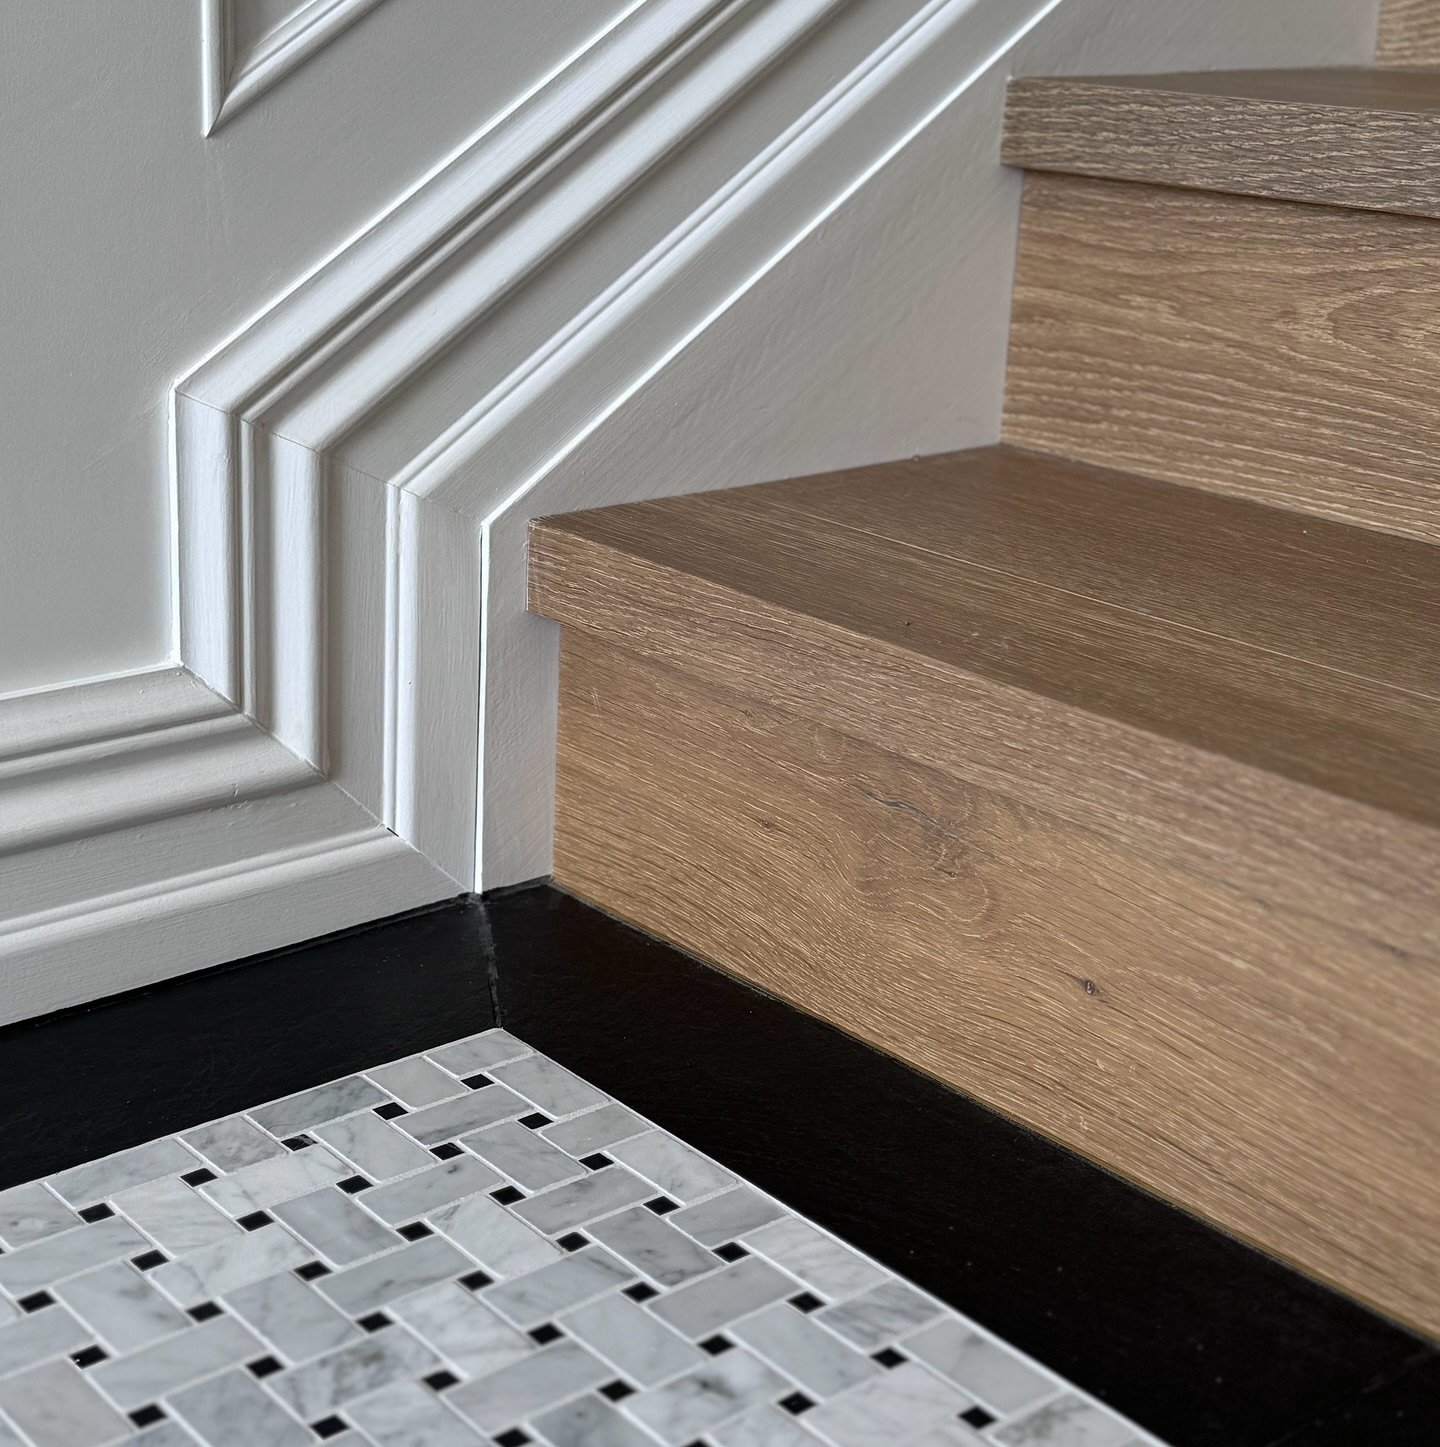 STAIR DETAIL - where the entrance tile meets the timber stairs, with a tiny bit of the custom panelling on the lower wall showing💕
.
#interiors #decor #homestyling #bathroomdesign 
#homeandliving #villas #bungalows #kitchendesign #curtaindesign
#arc